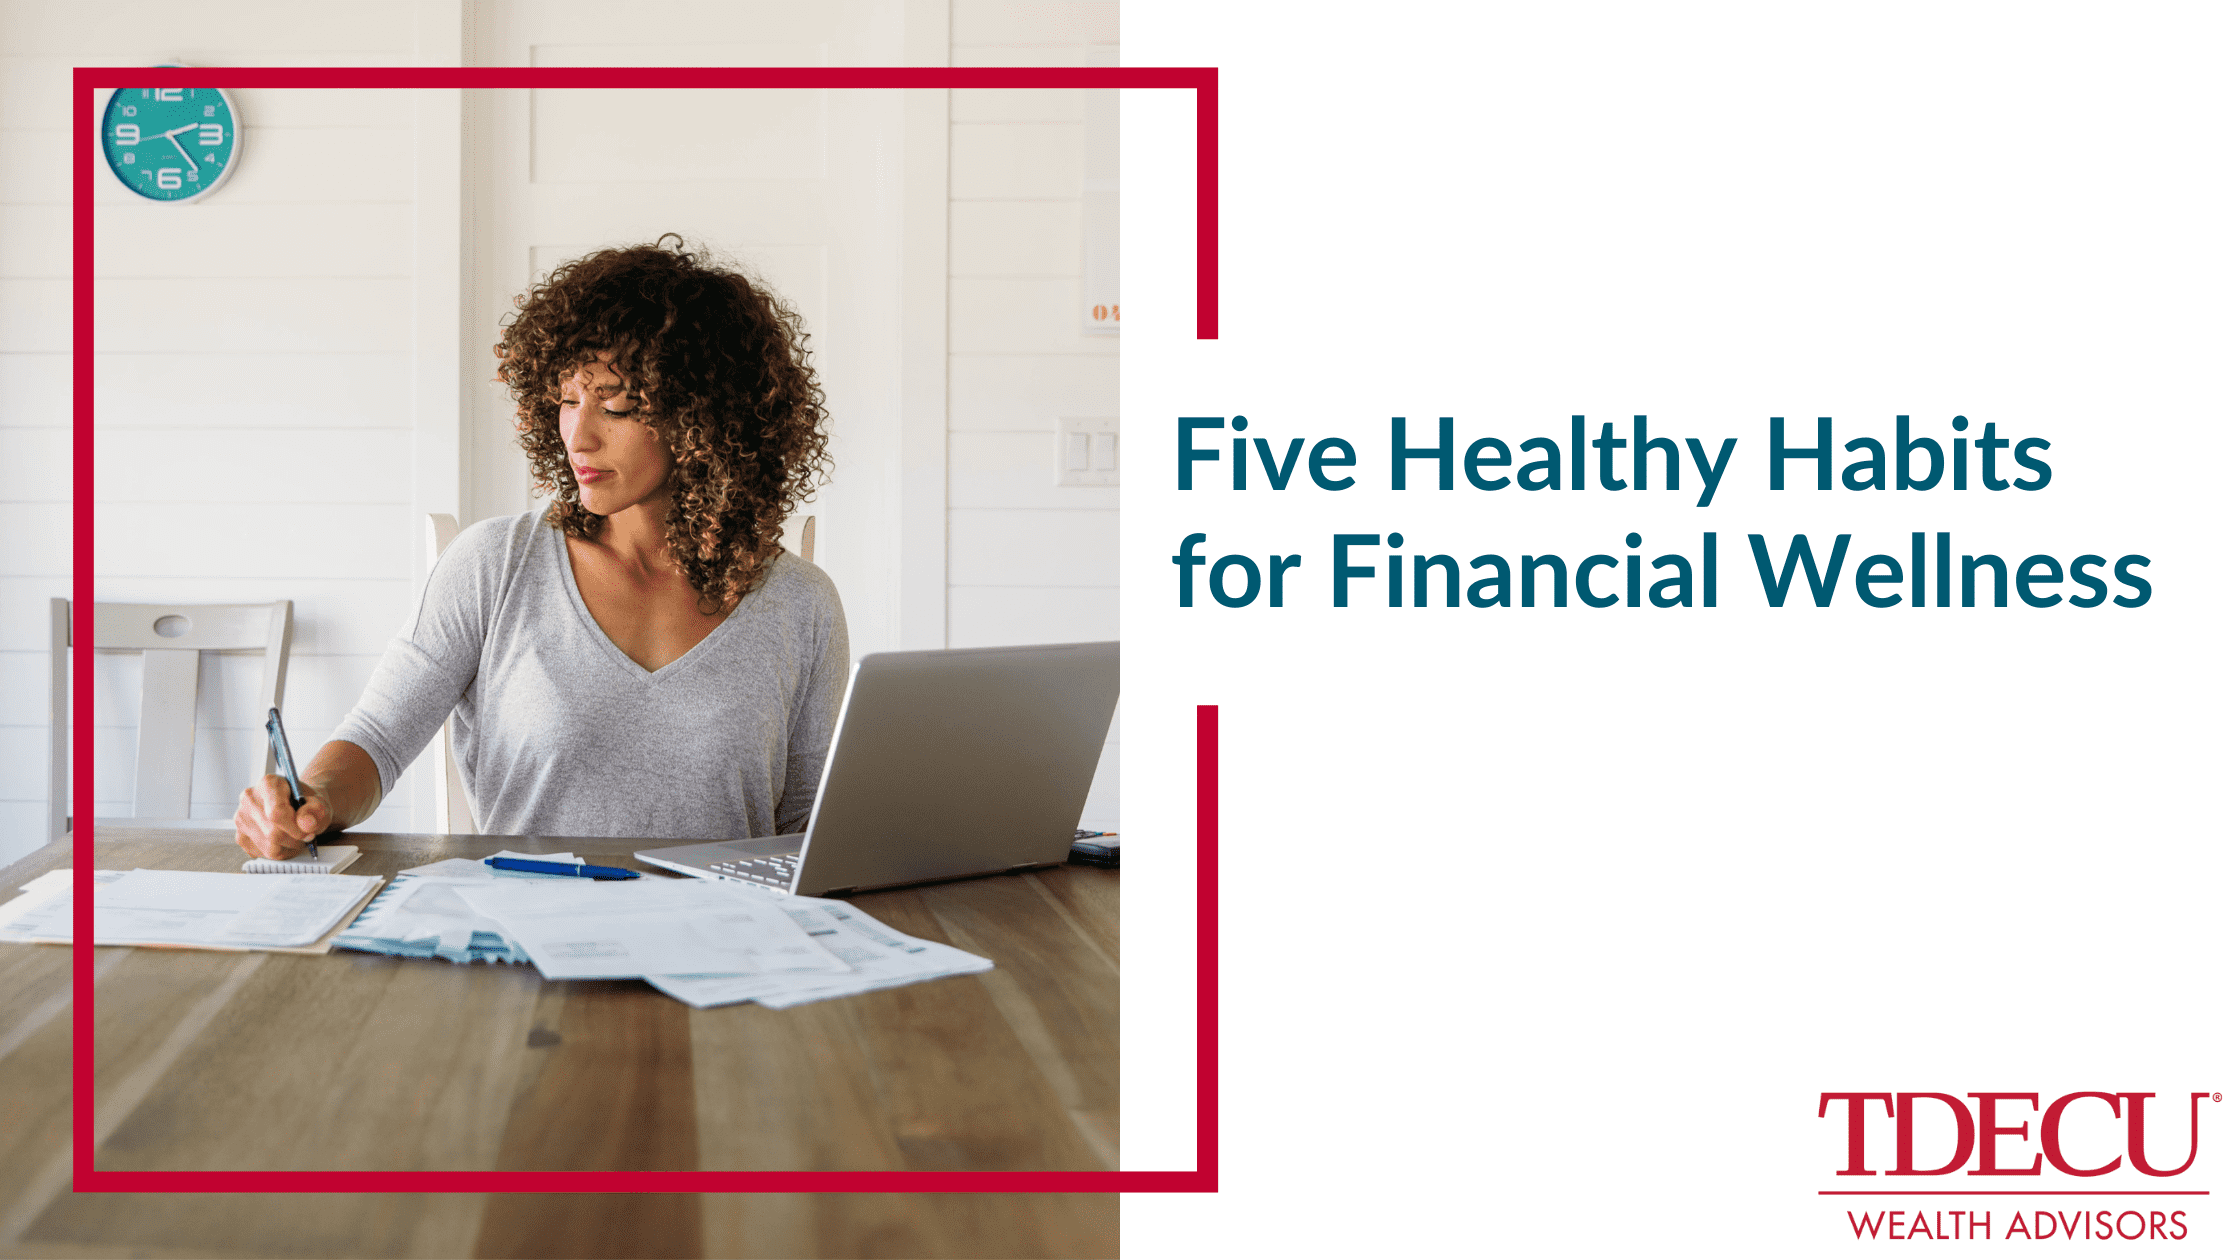 Five Healthy Habits for Financial Wellness